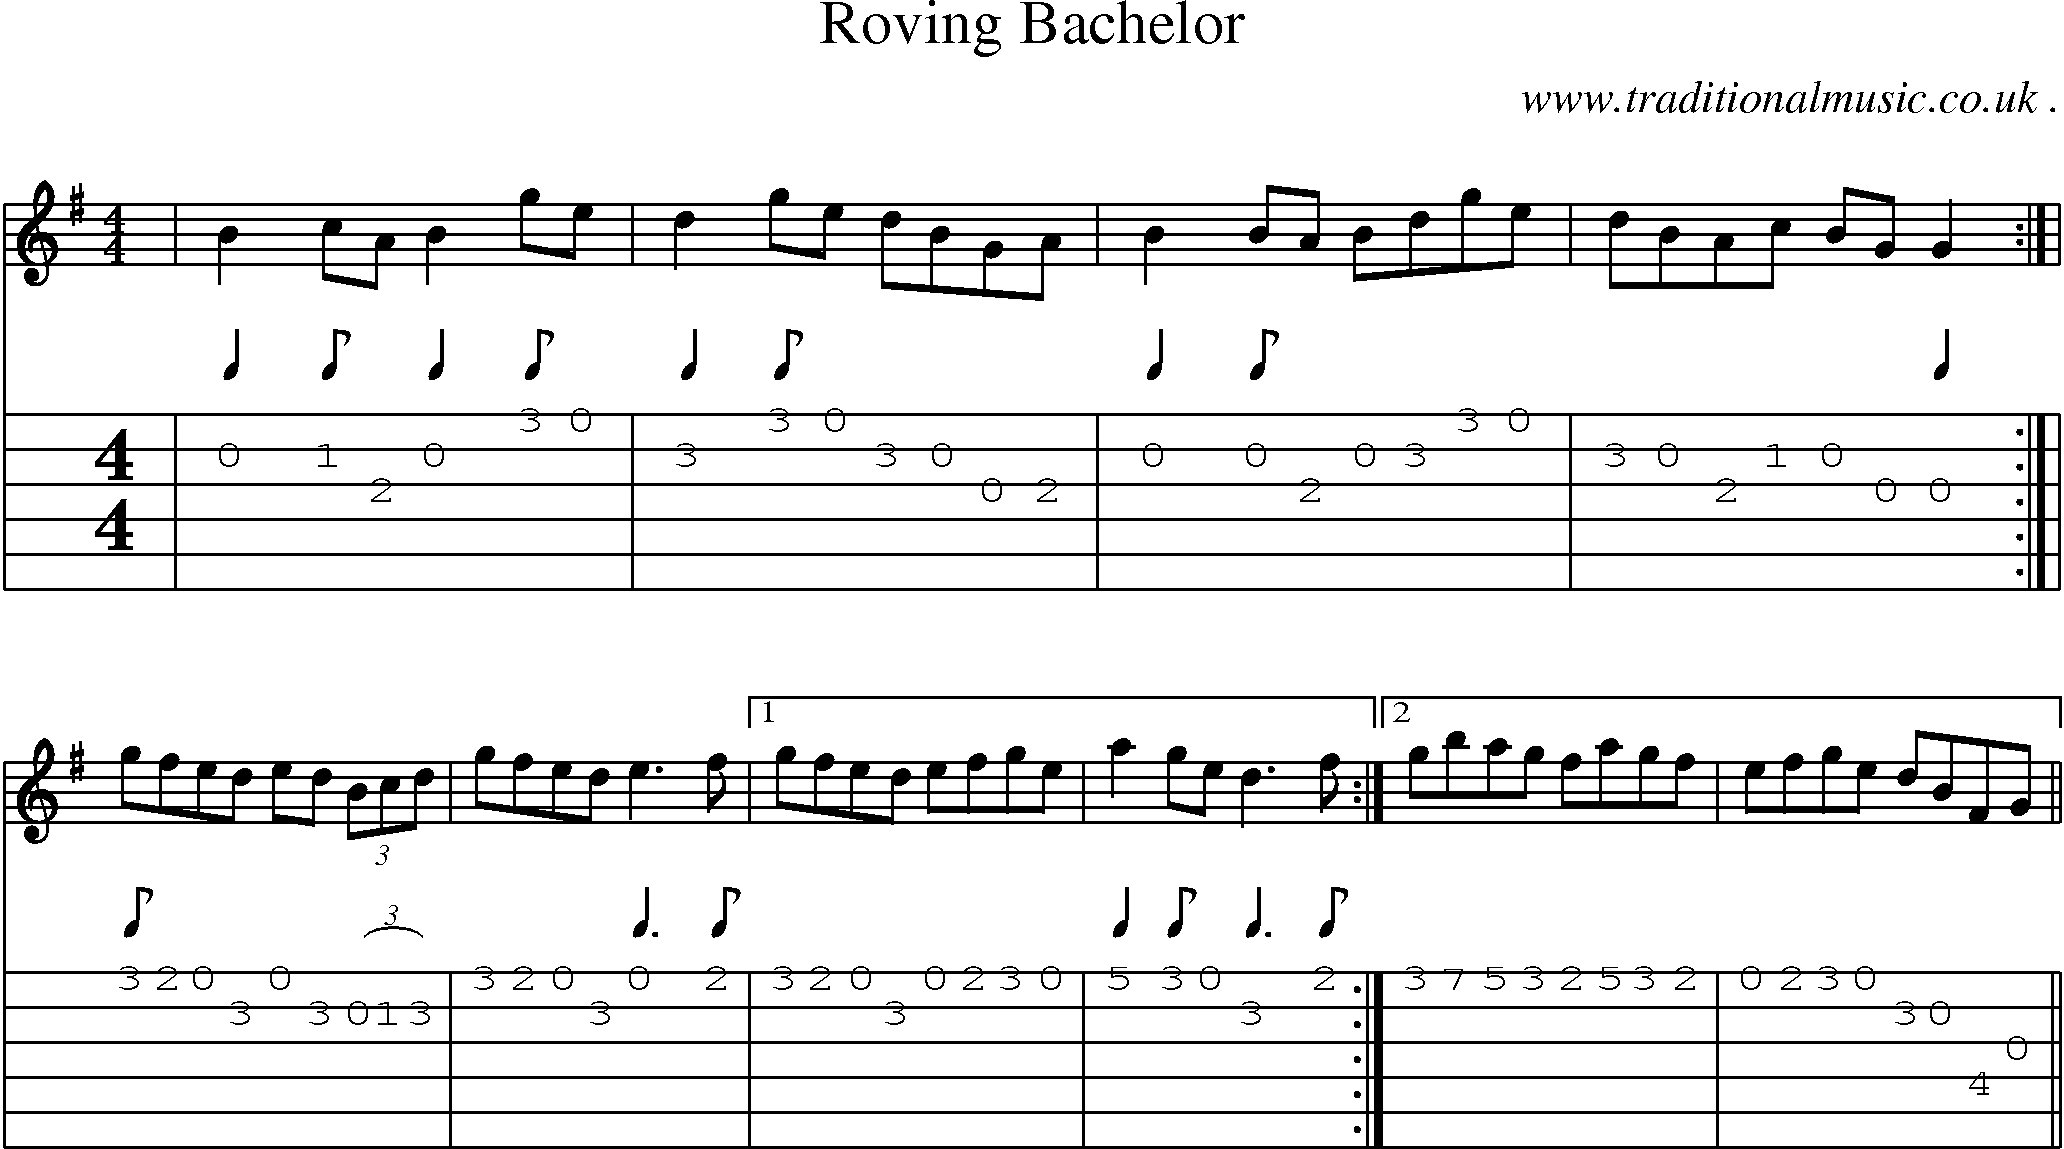 Sheet-Music and Guitar Tabs for Roving Bachelor